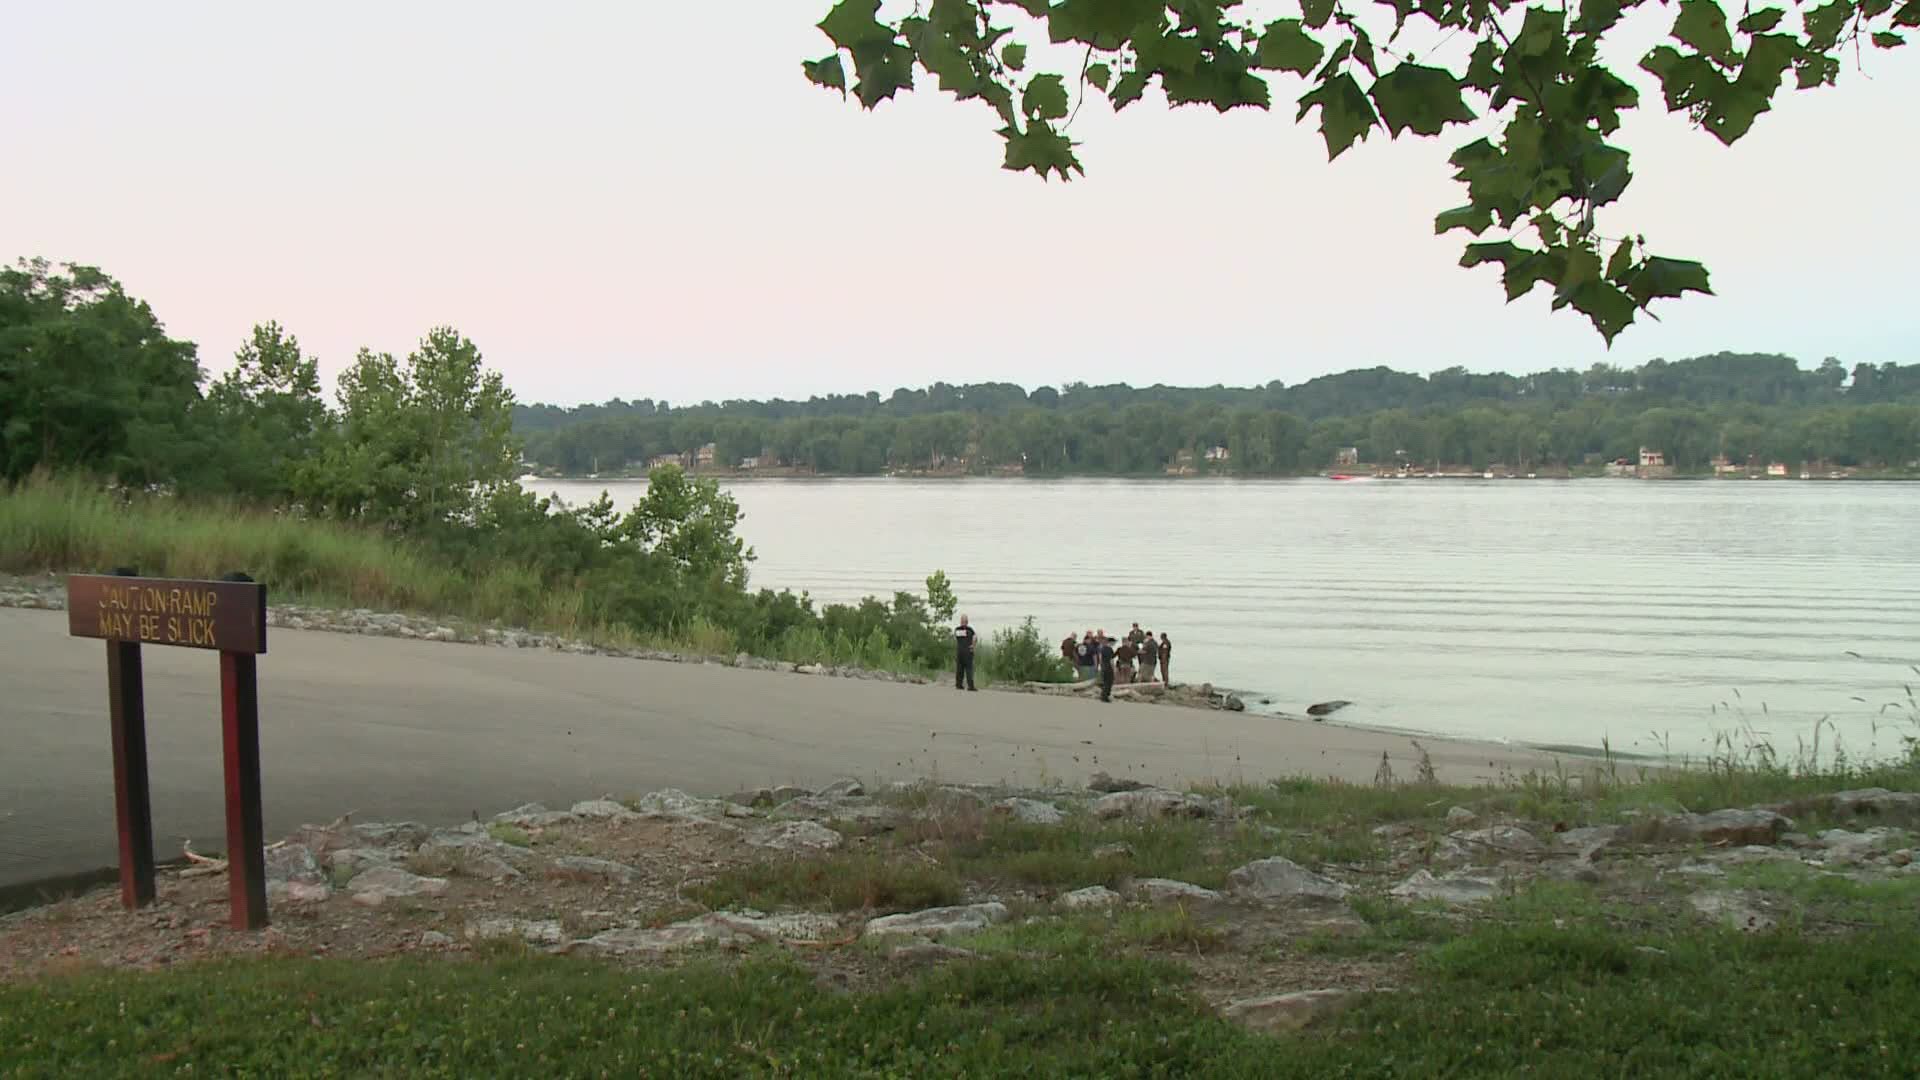 Conservation officers in Indiana say they found the body of 52 year old Harold Snook after a two day search.